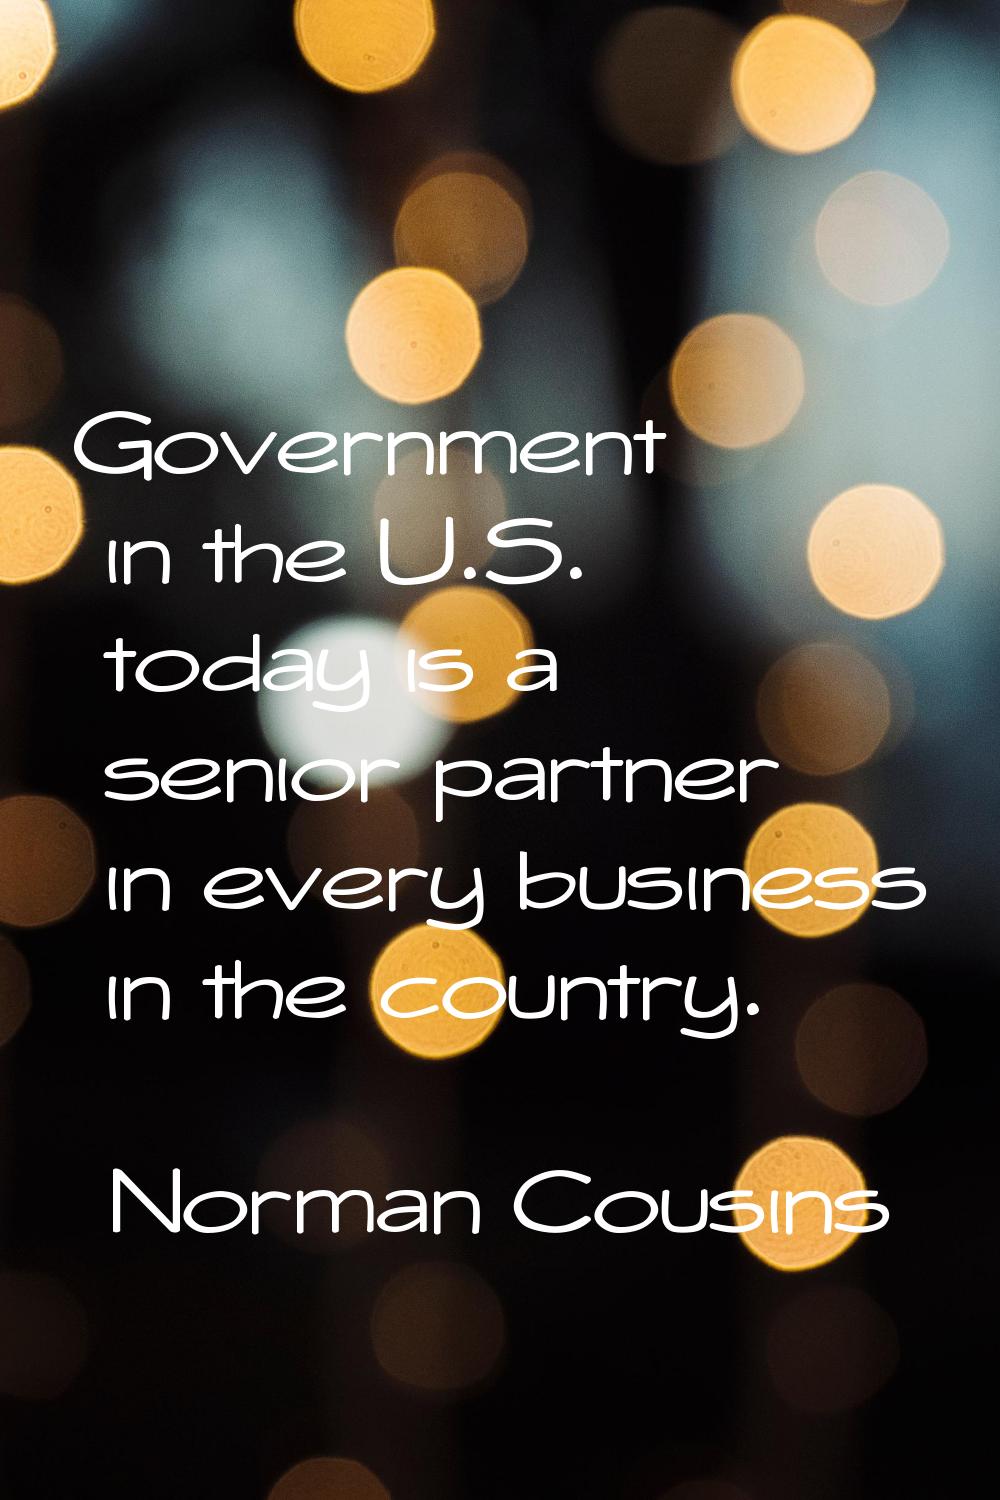 Government in the U.S. today is a senior partner in every business in the country.